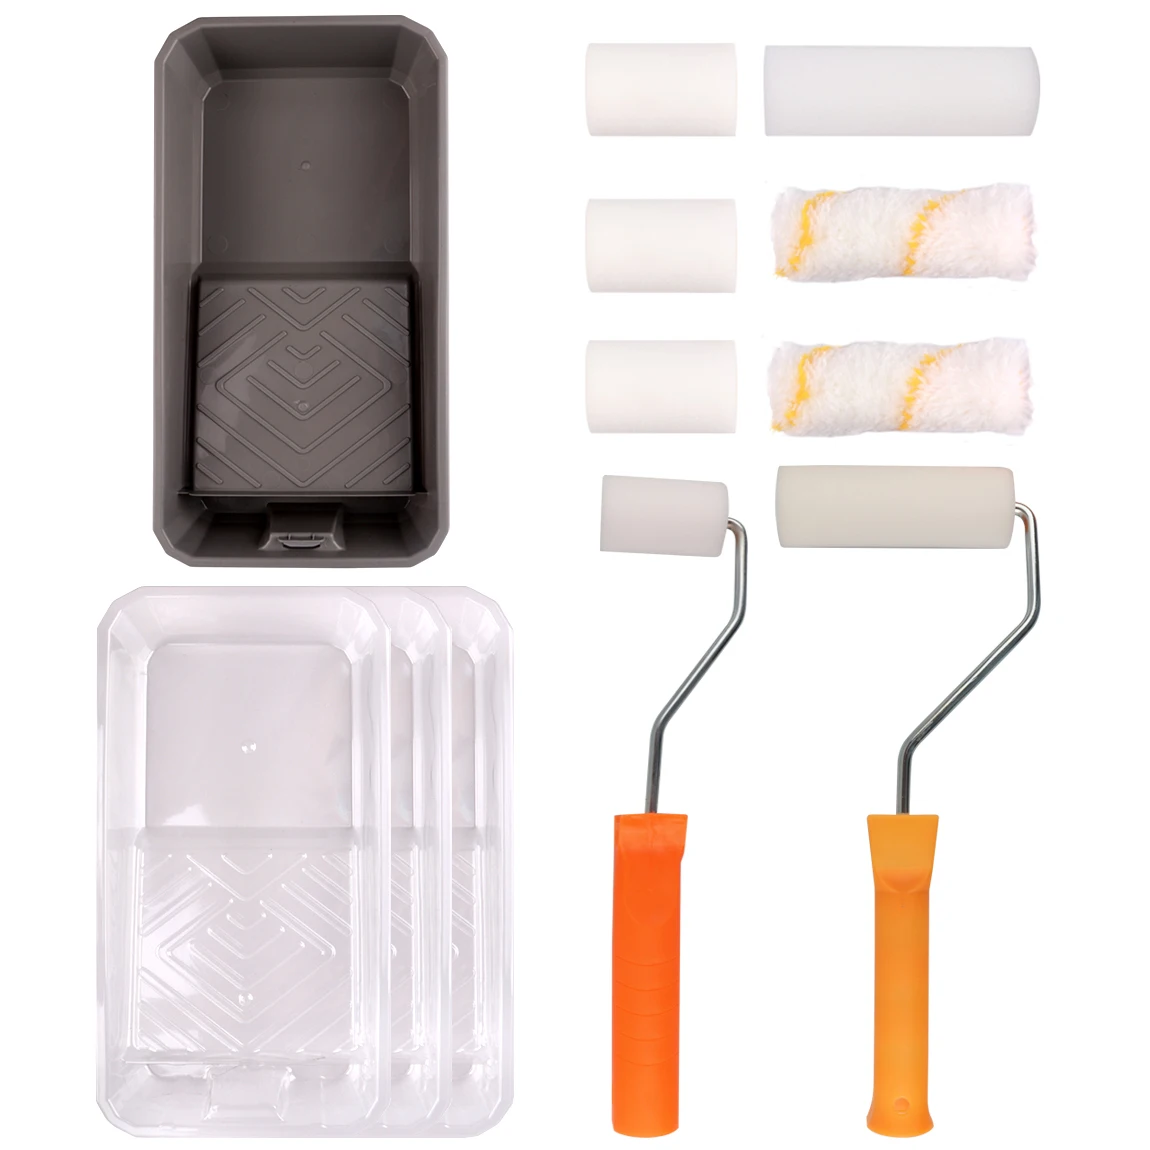 14pcs Paint Roller Set, 4 inch 2 inch Paint Roller Brush Kit with Trays,Roller Frame,Home Painting Supplies for Wall,Cabinet